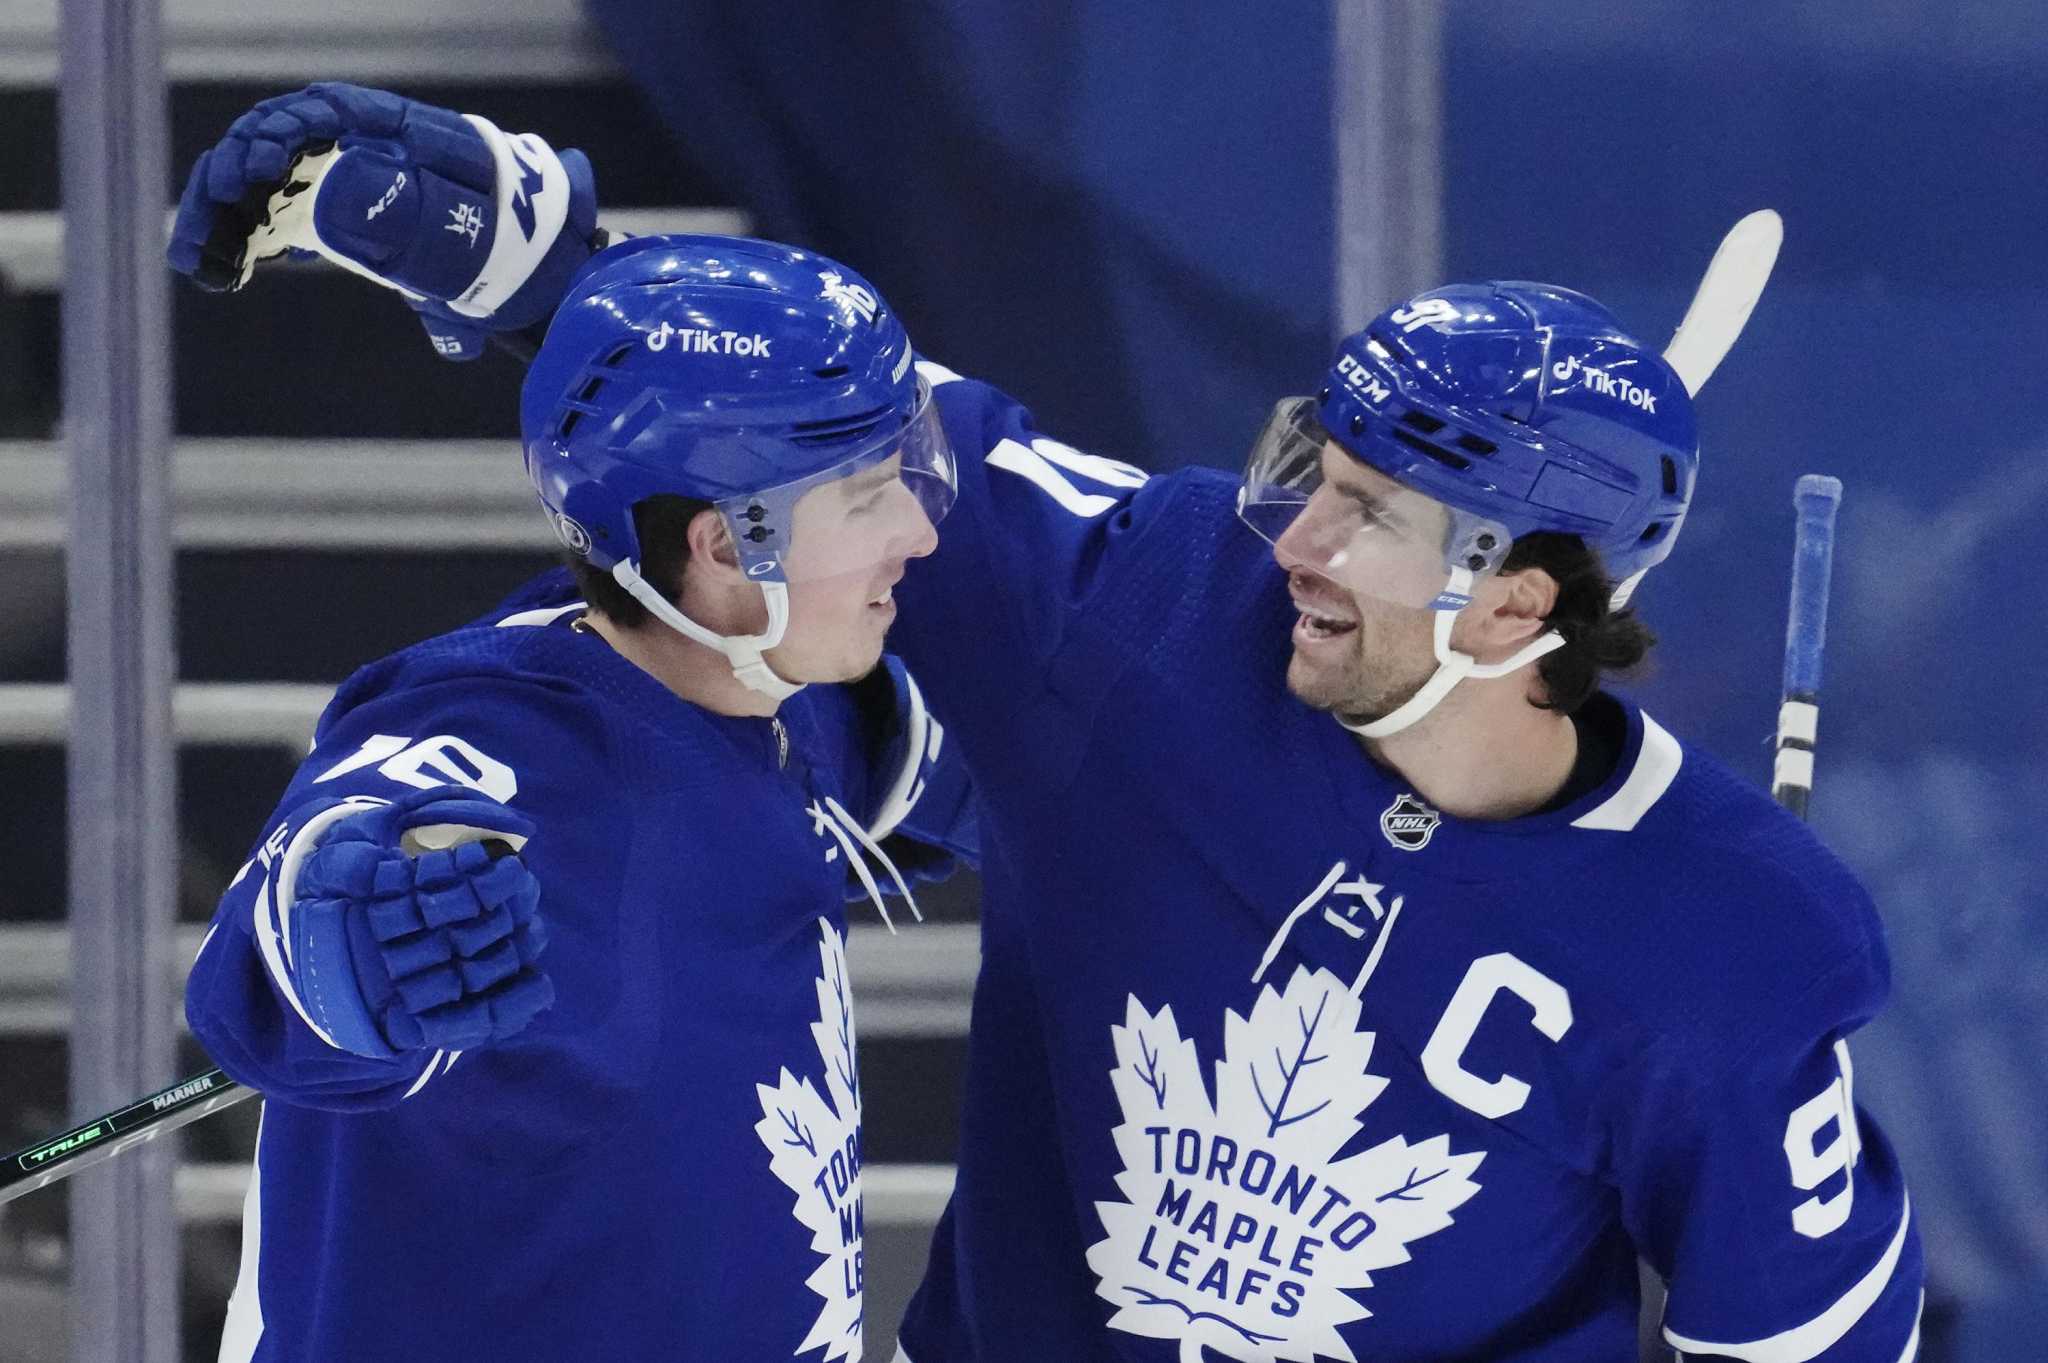 Auston Matthews and Mitch Marner hit the ice in the Leafs uniform